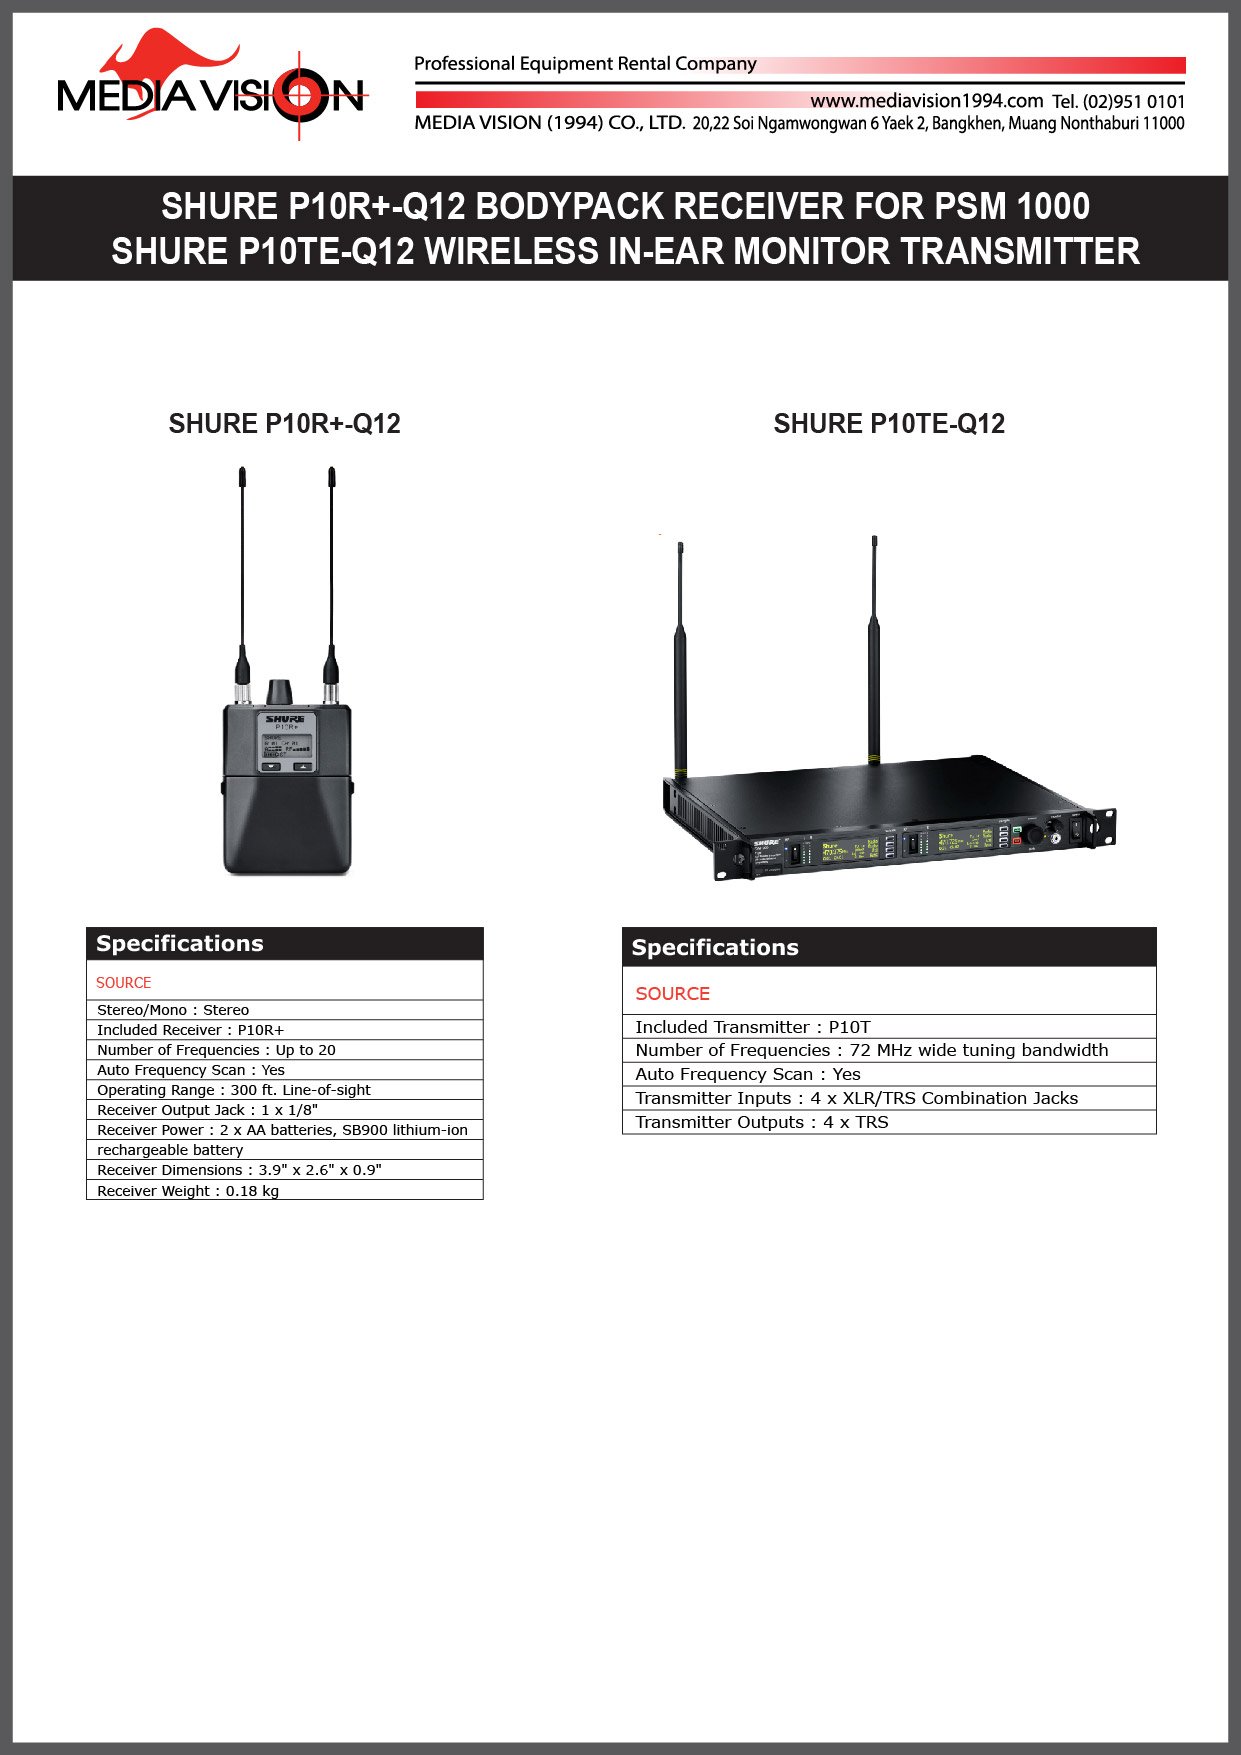 SHURE P10R+-Q12 BODYPACK RECEIVER FOR PSM 1000 , SHURE P10TE-Q12 WIRELESS IN-EAR MONITOR TRANSMITTER